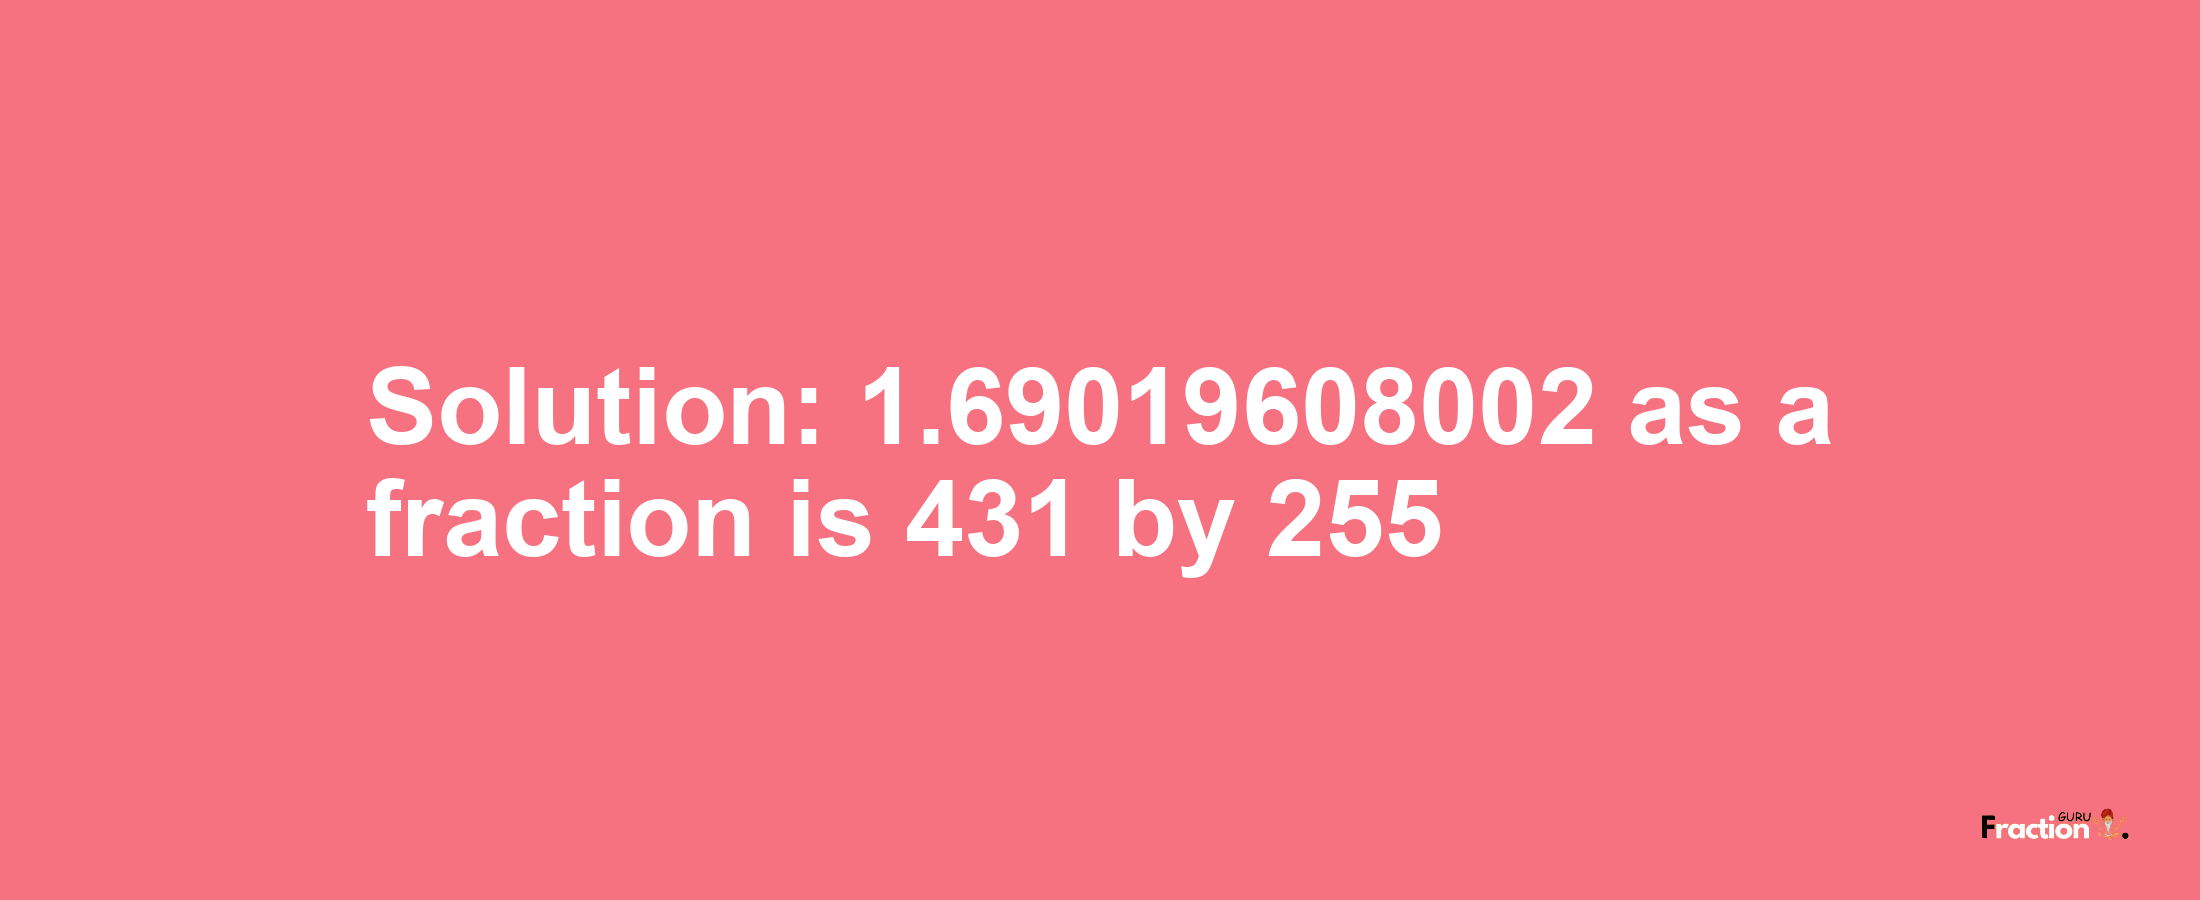 Solution:1.69019608002 as a fraction is 431/255